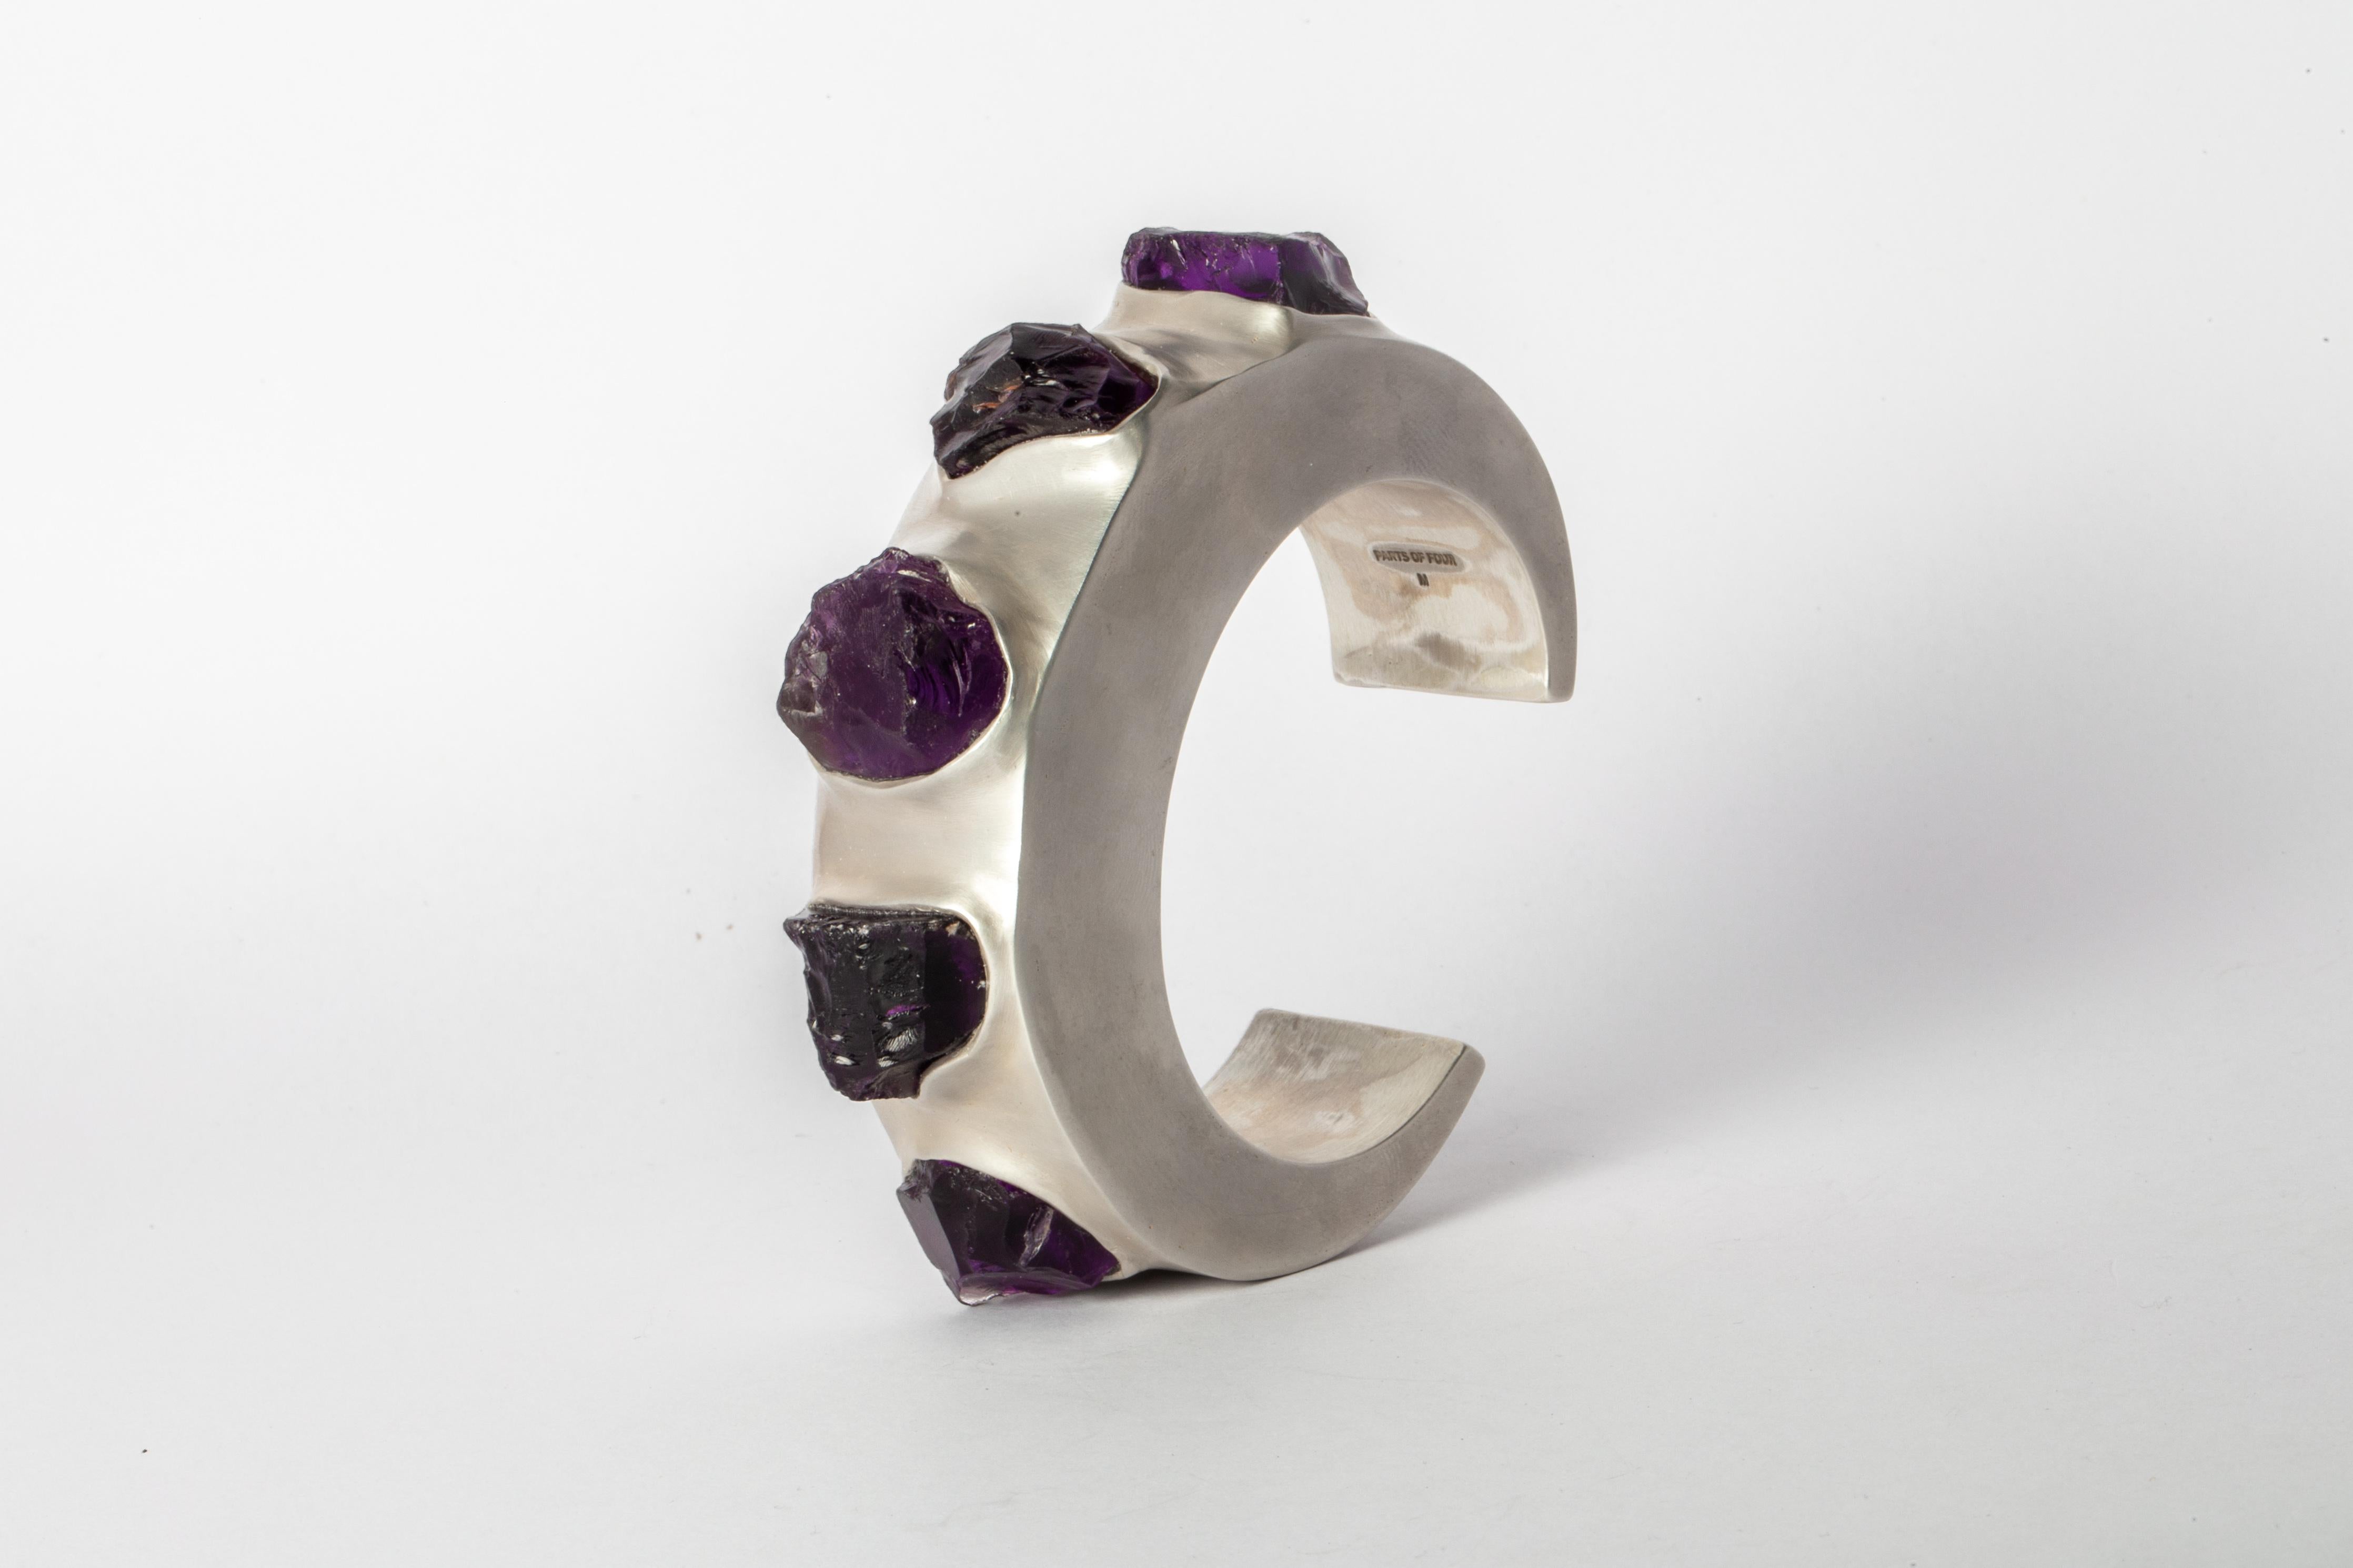 Bracelet in sterling silver and slabs of rough amethyst. This item is made with a naturally occurring element and will vary from the photograph you see. Each piece is unique and this is what makes it special. We use facet-grade rough gemstones which